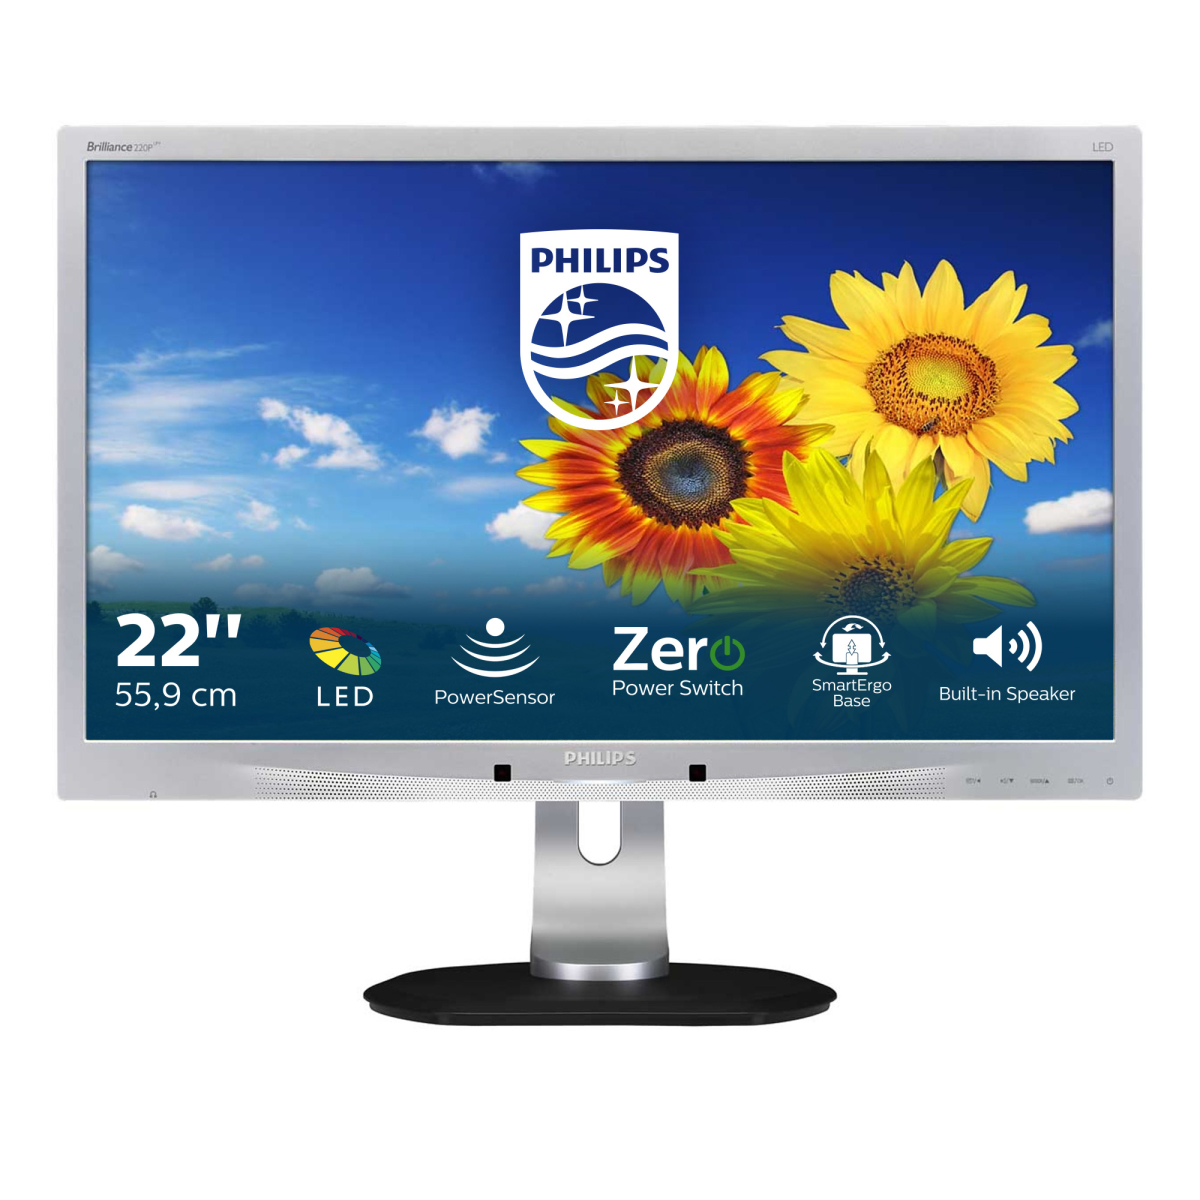 Philips Brilliance Lcd Monitor Led Backlight 220p4lpyes00 0 In